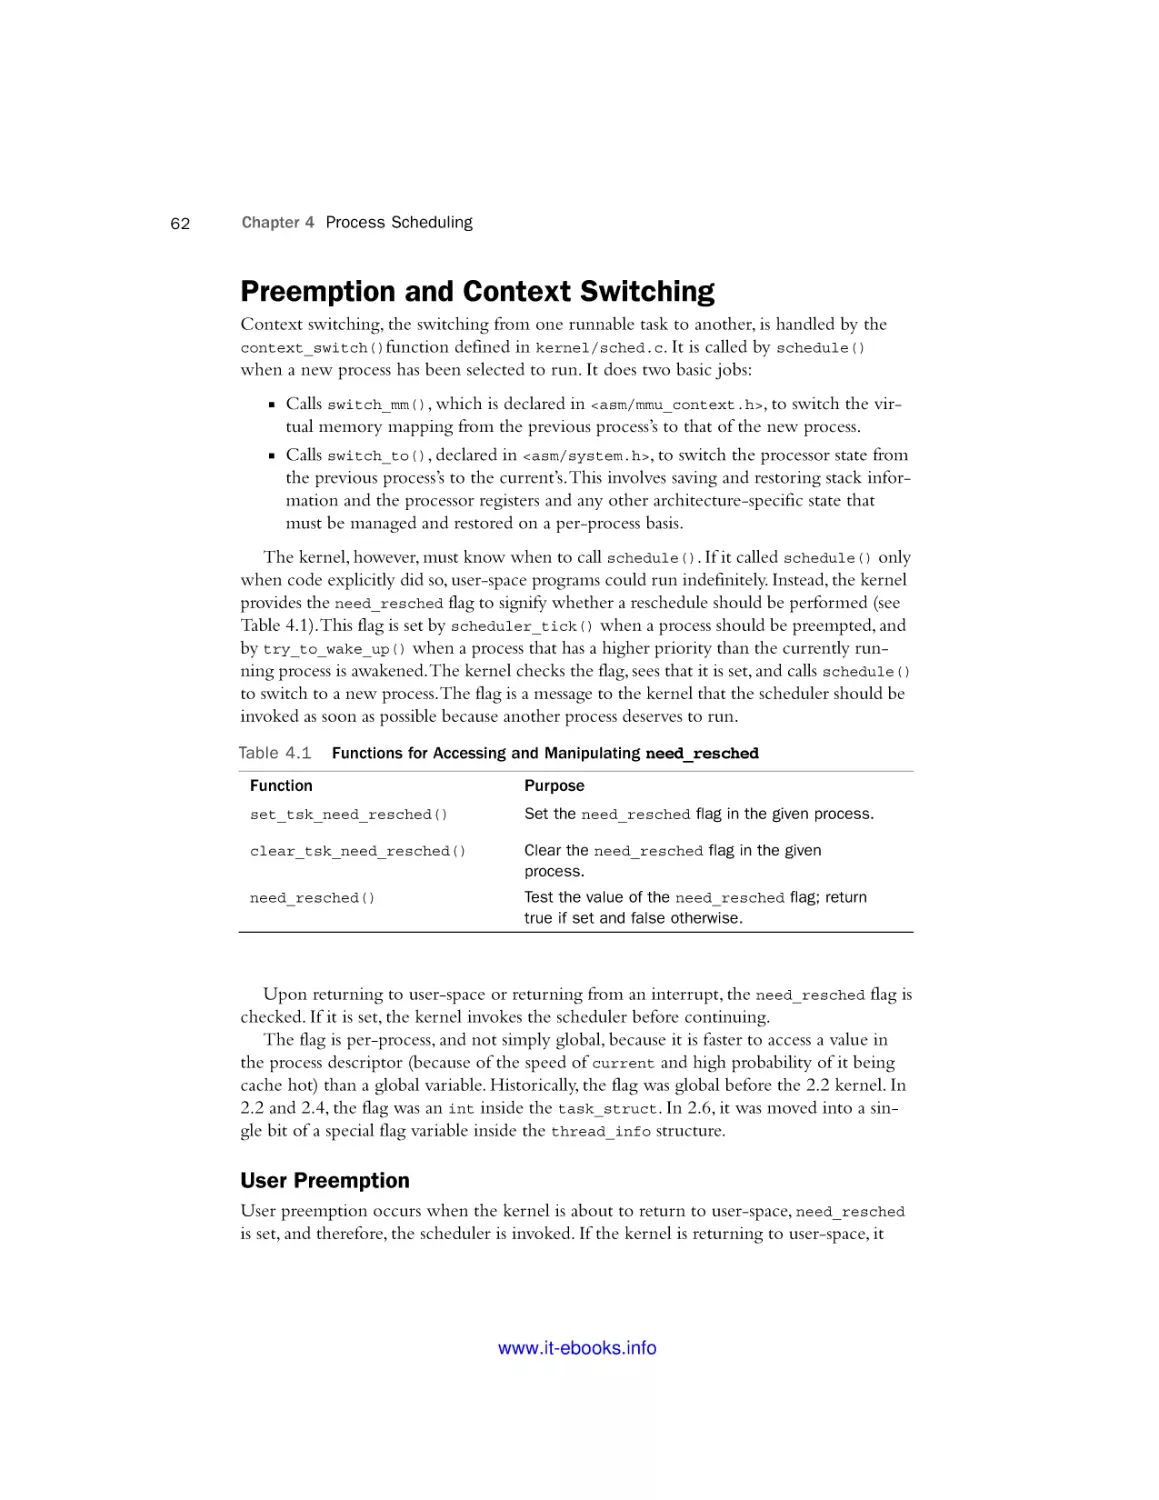 Preemption and Context Switching
User Preemption